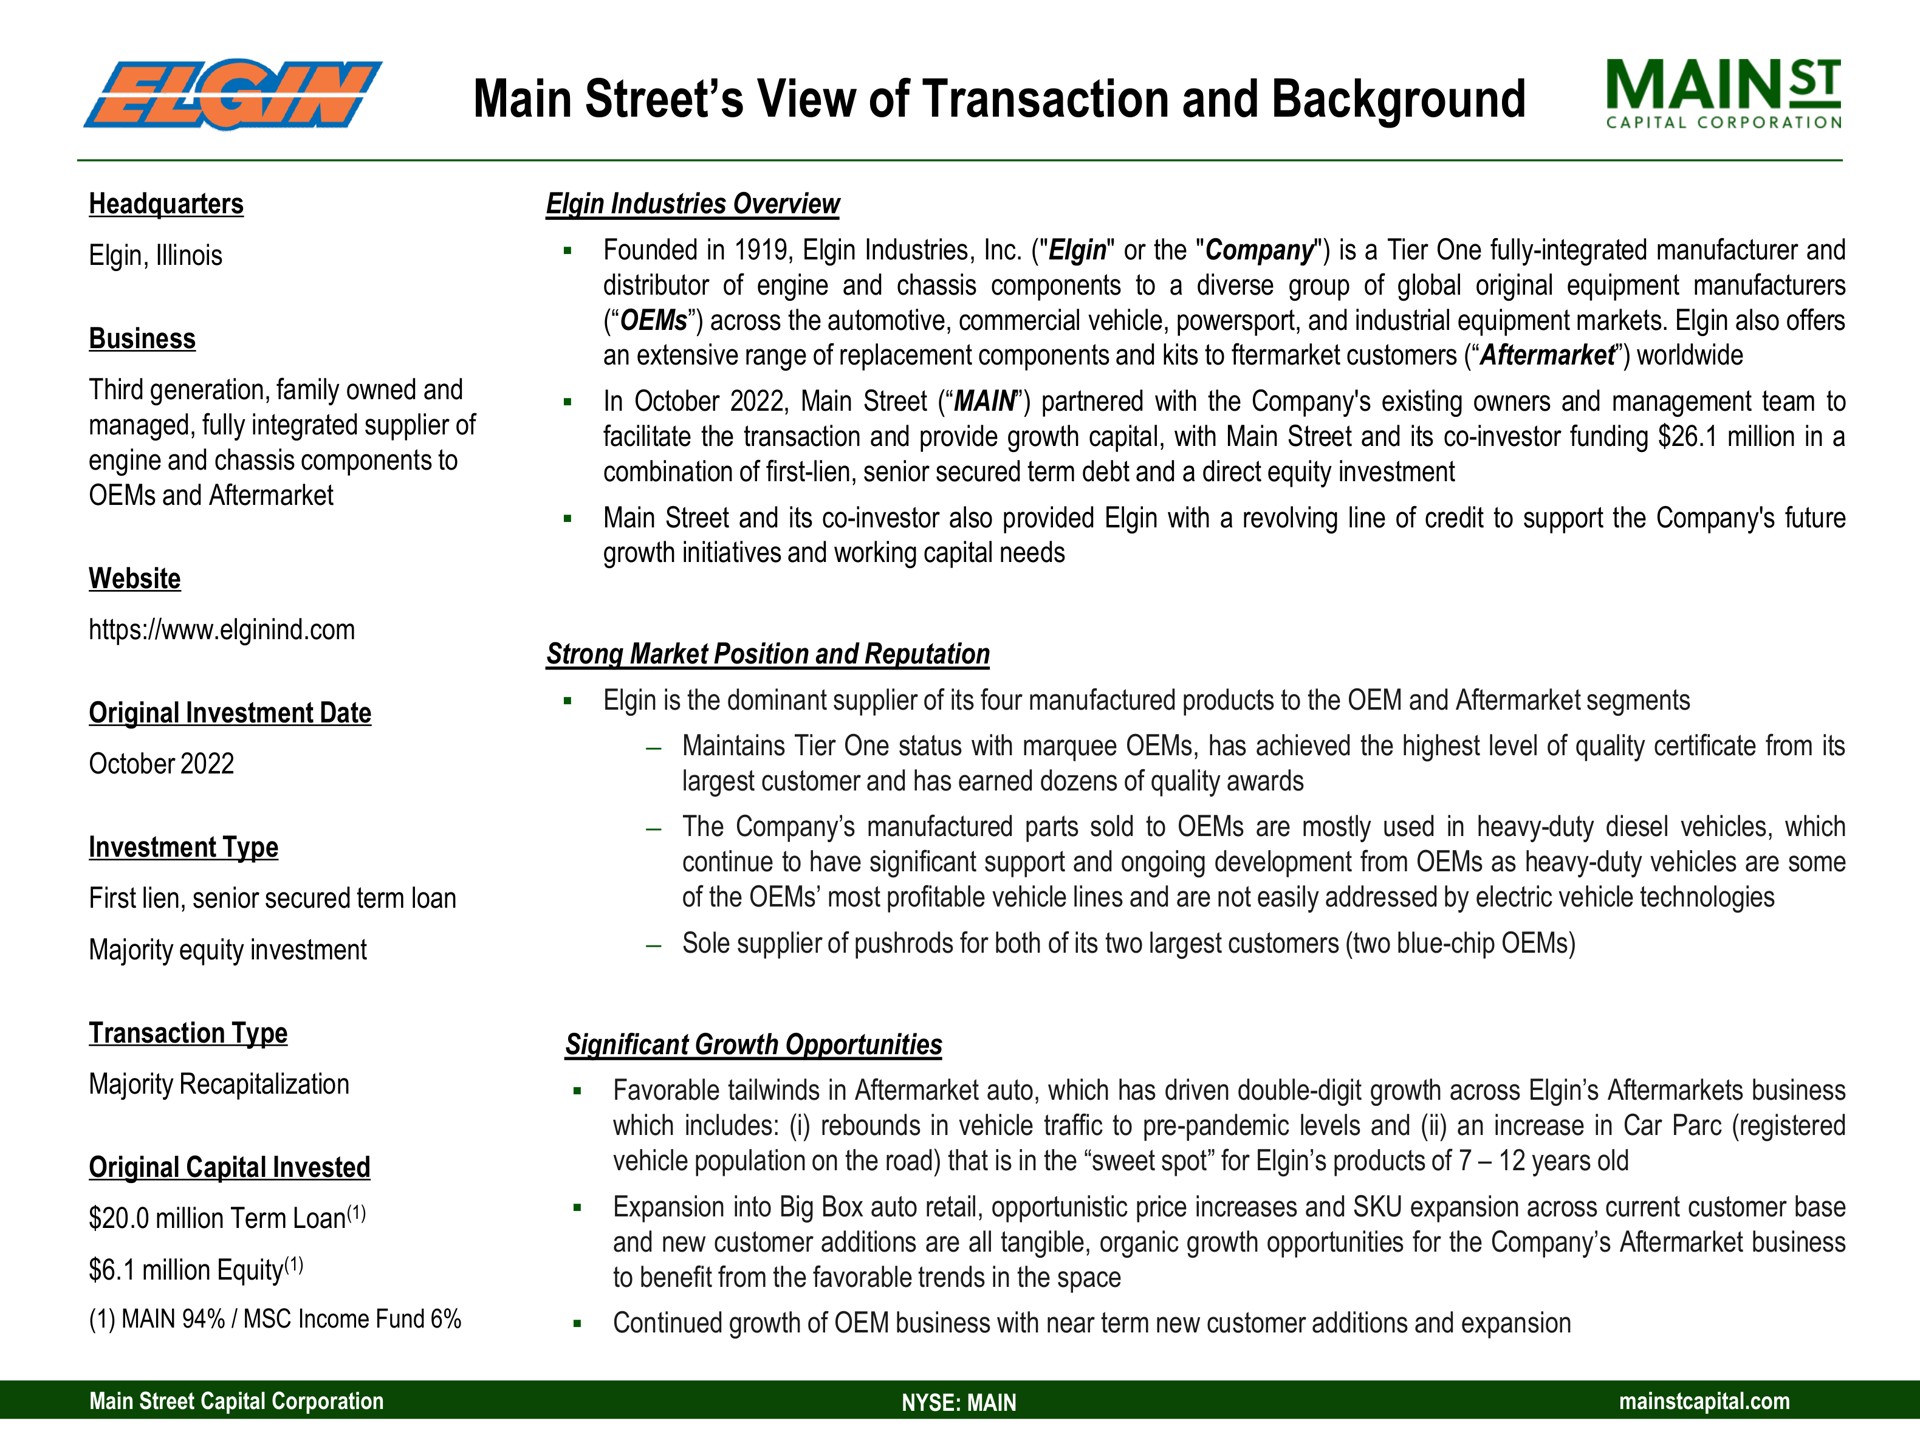 main street view of transaction and background | Main Street Capital